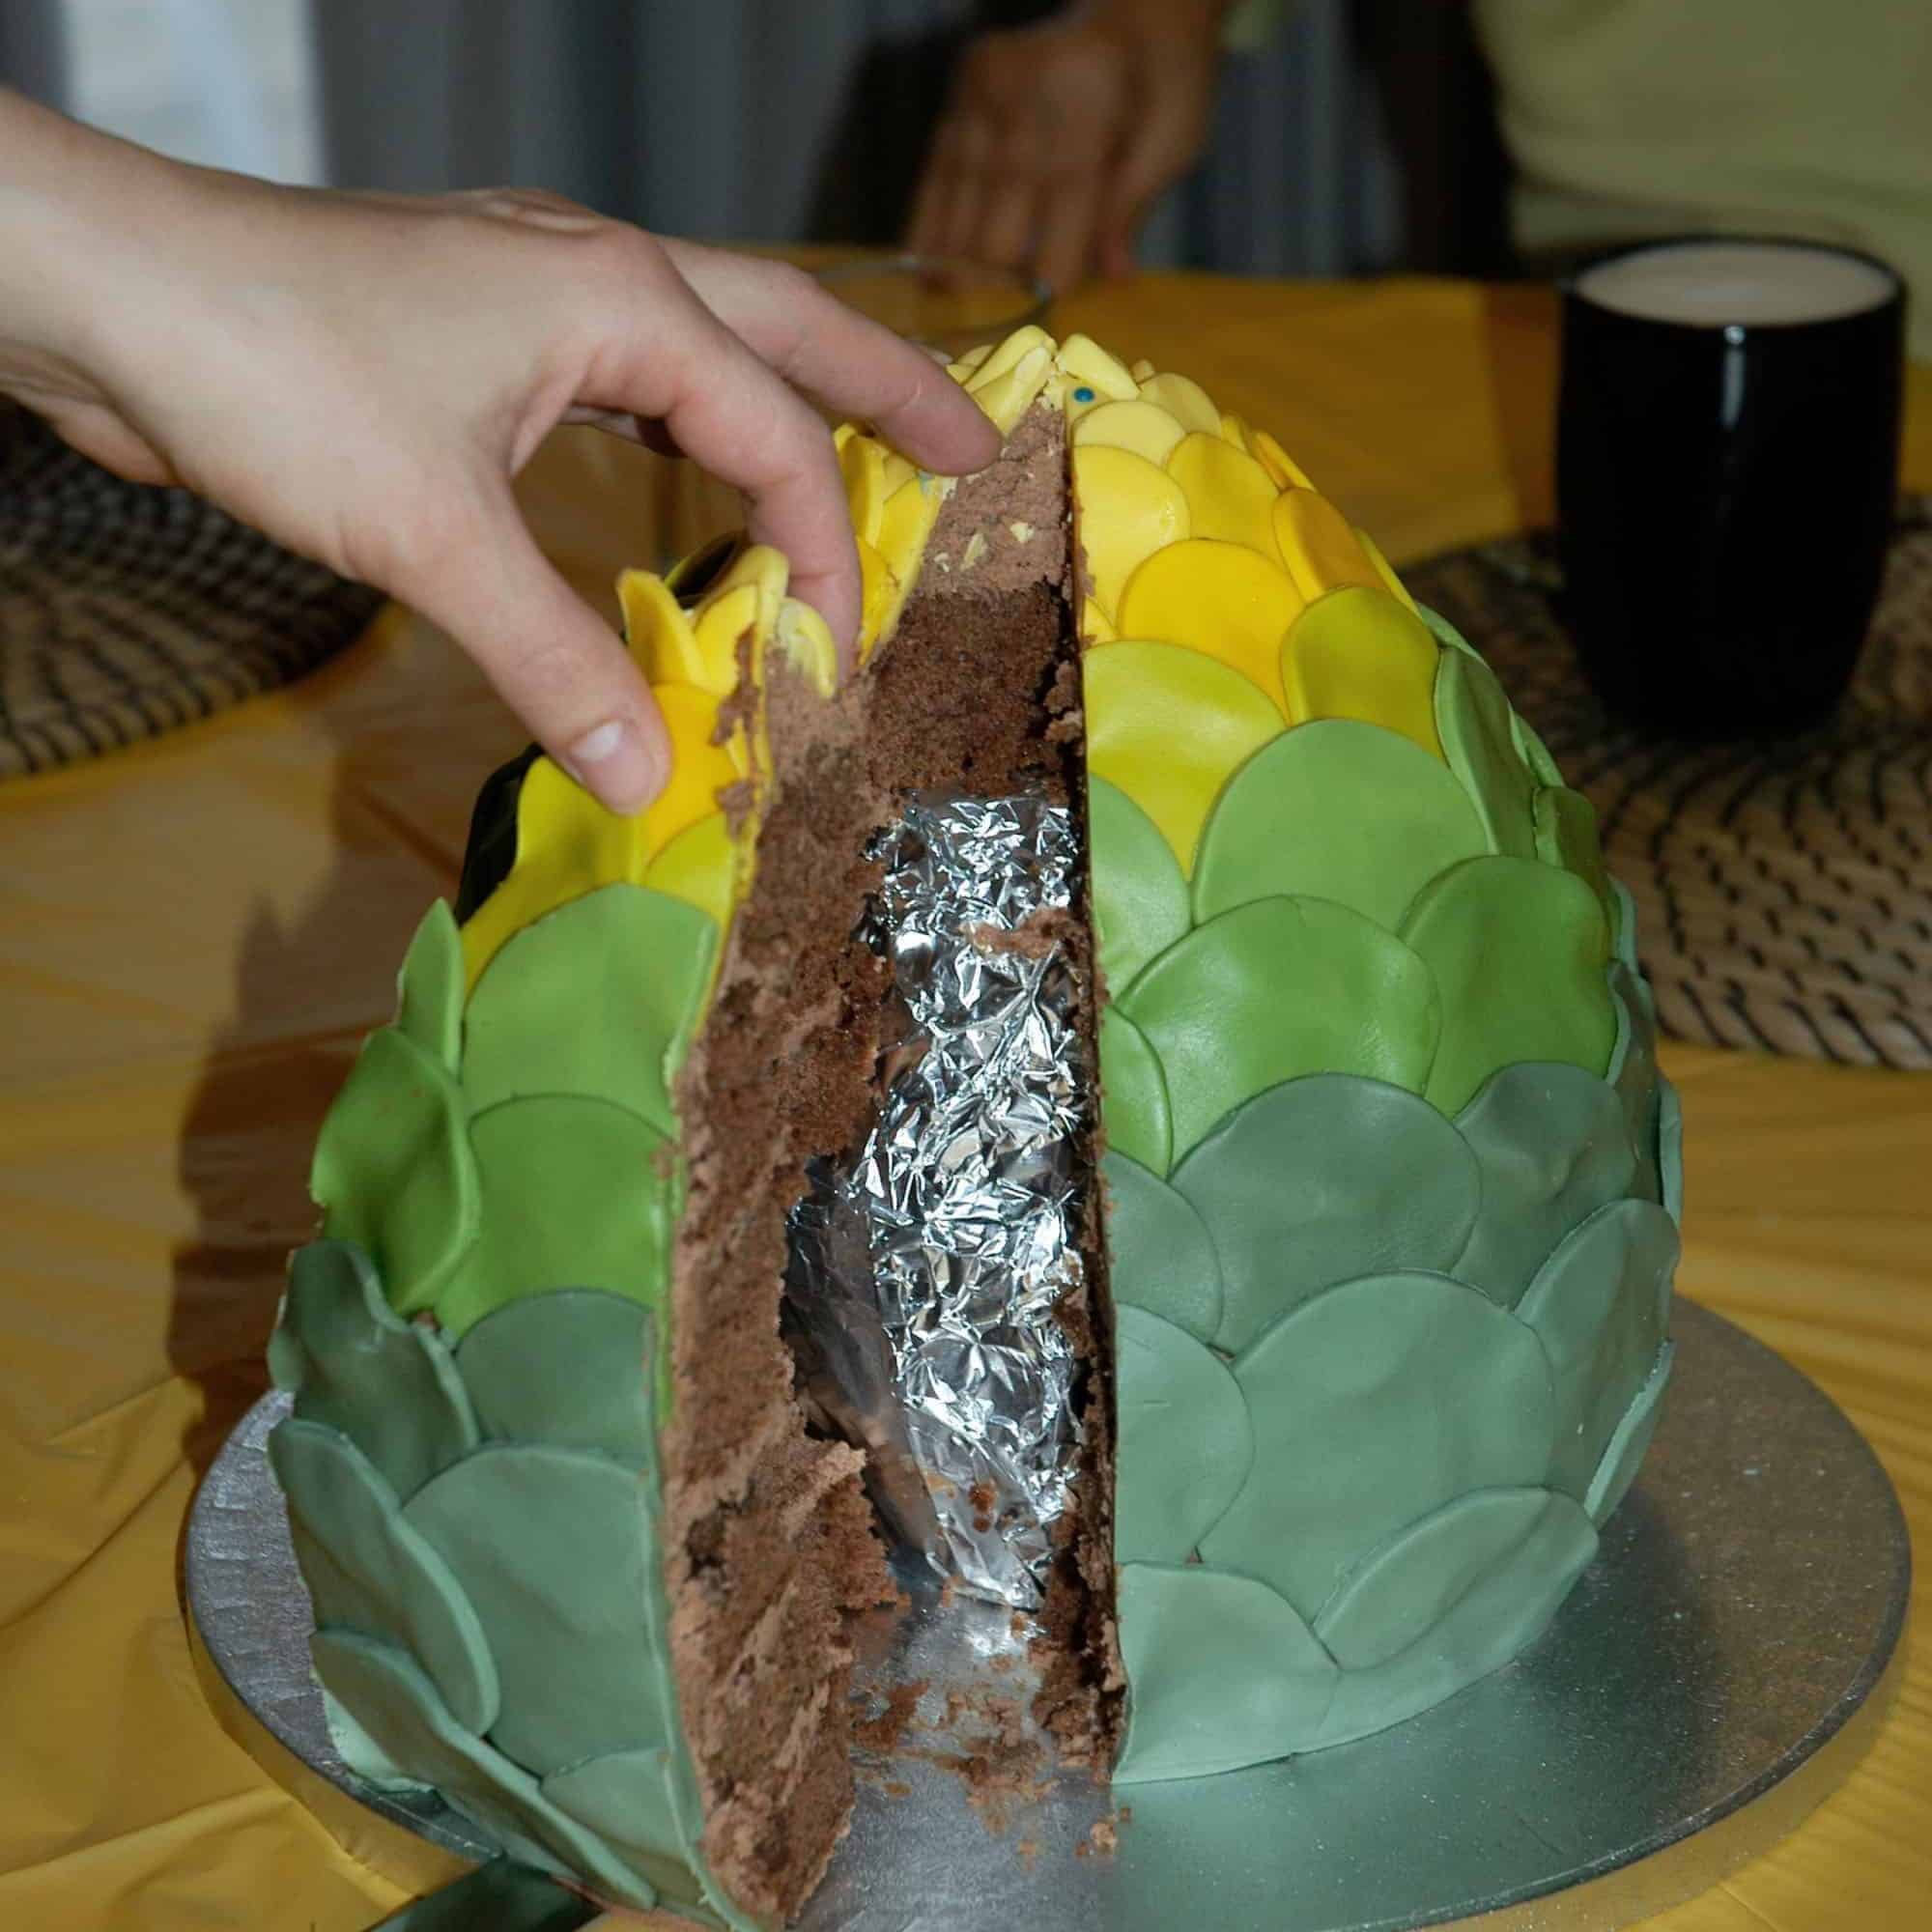 Dragon egg cake with a surprise inside